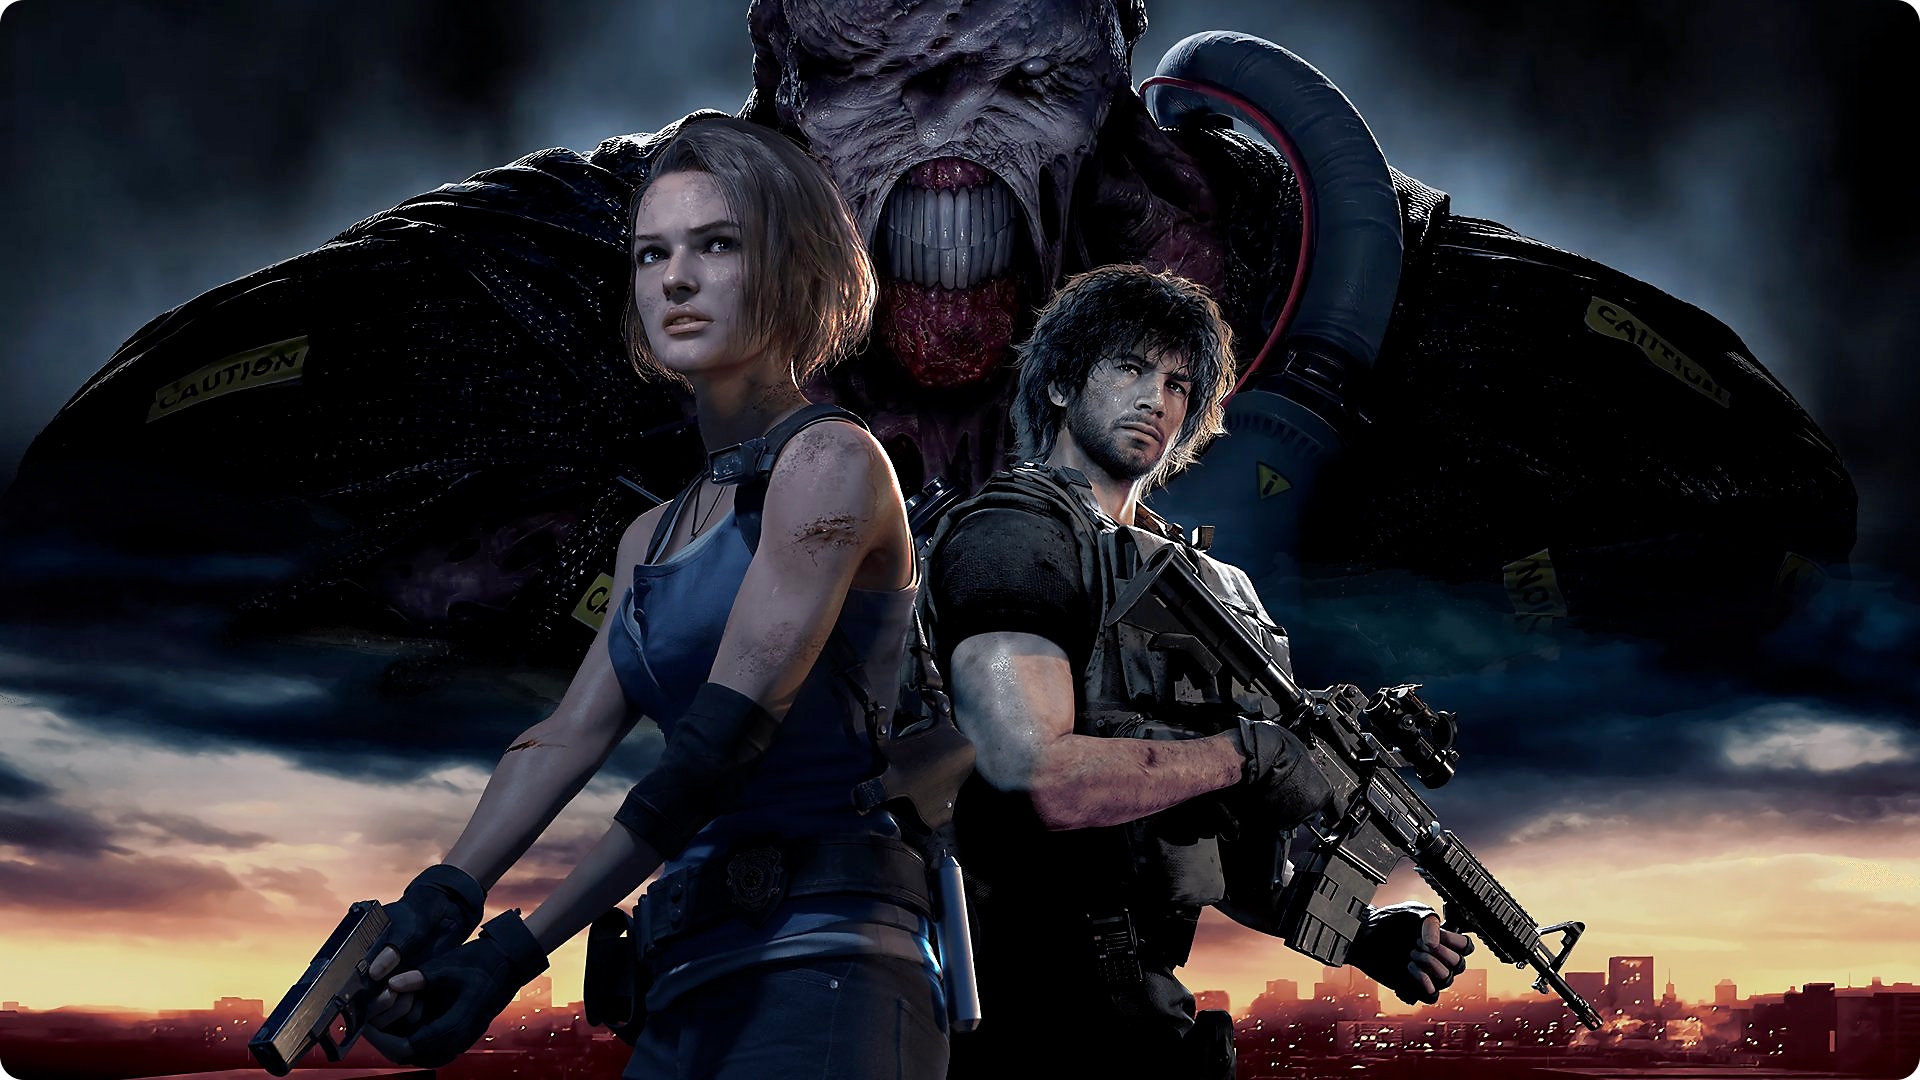 Resident Evil 3 key art showing main characters Jill and Carlos in the foreground and main antagonist Nemesis in the background. 